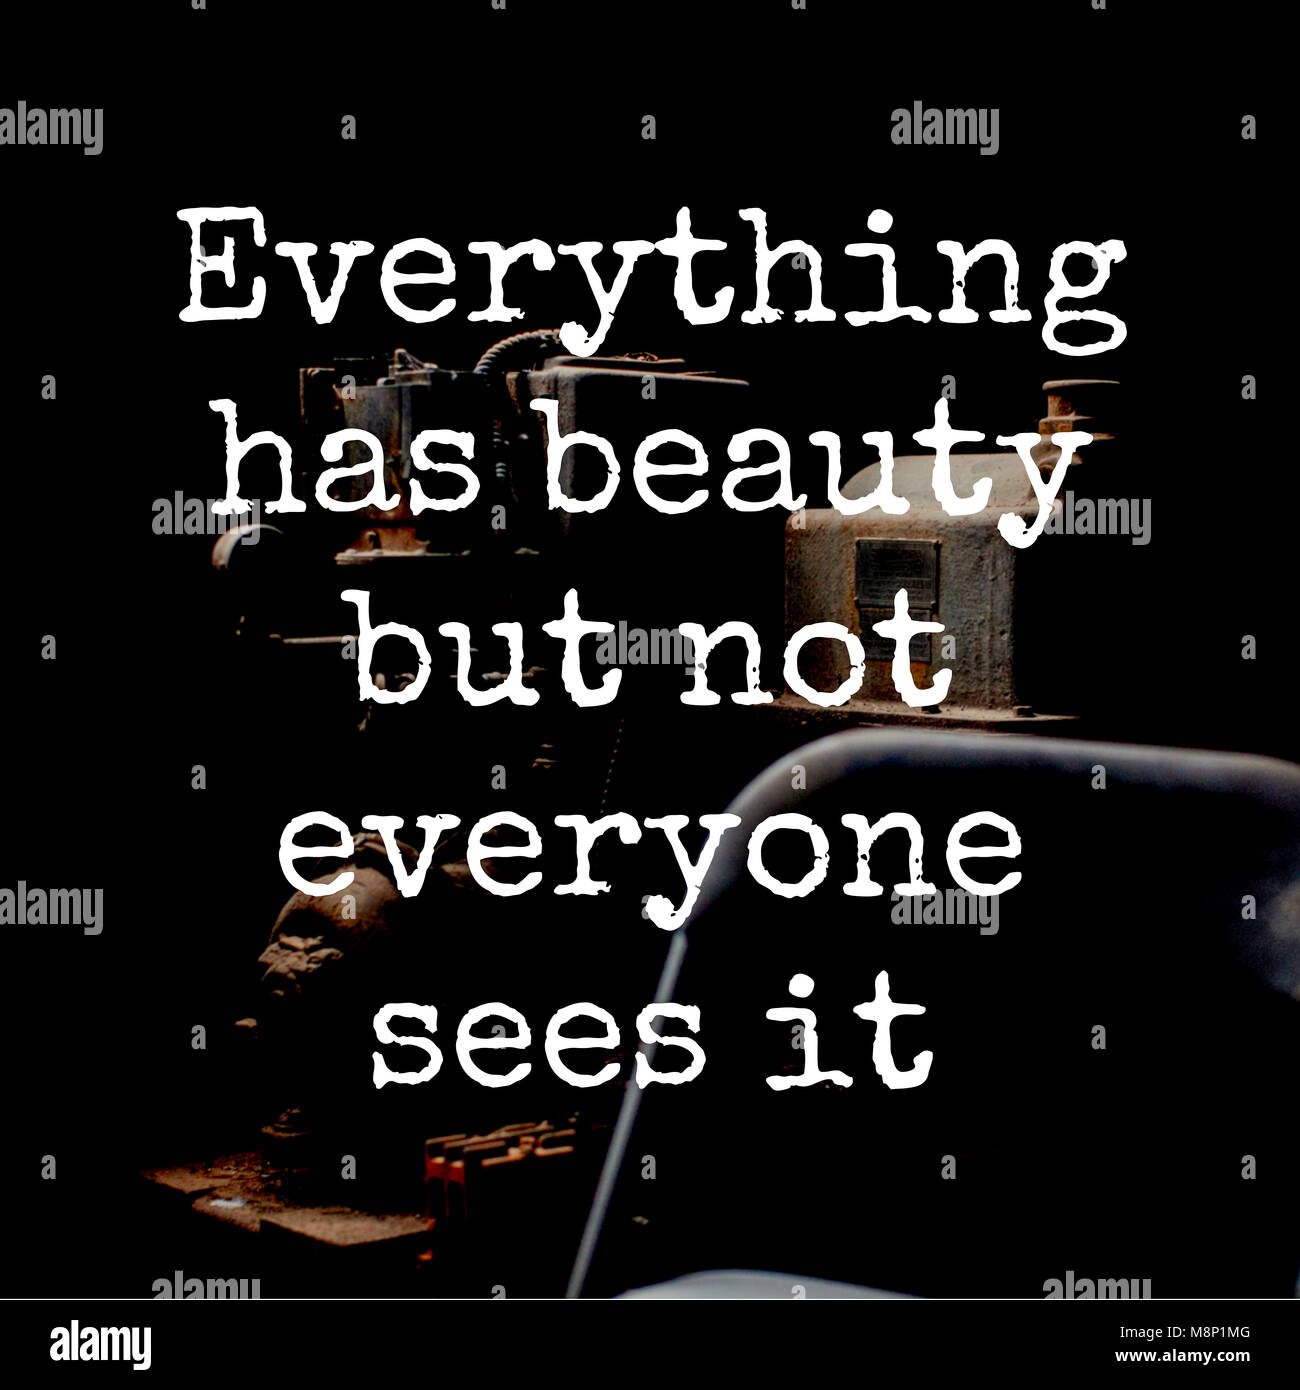 Everything Has Beauty But Not Everyone Sees It Social Media Quotes Printablesocial Media